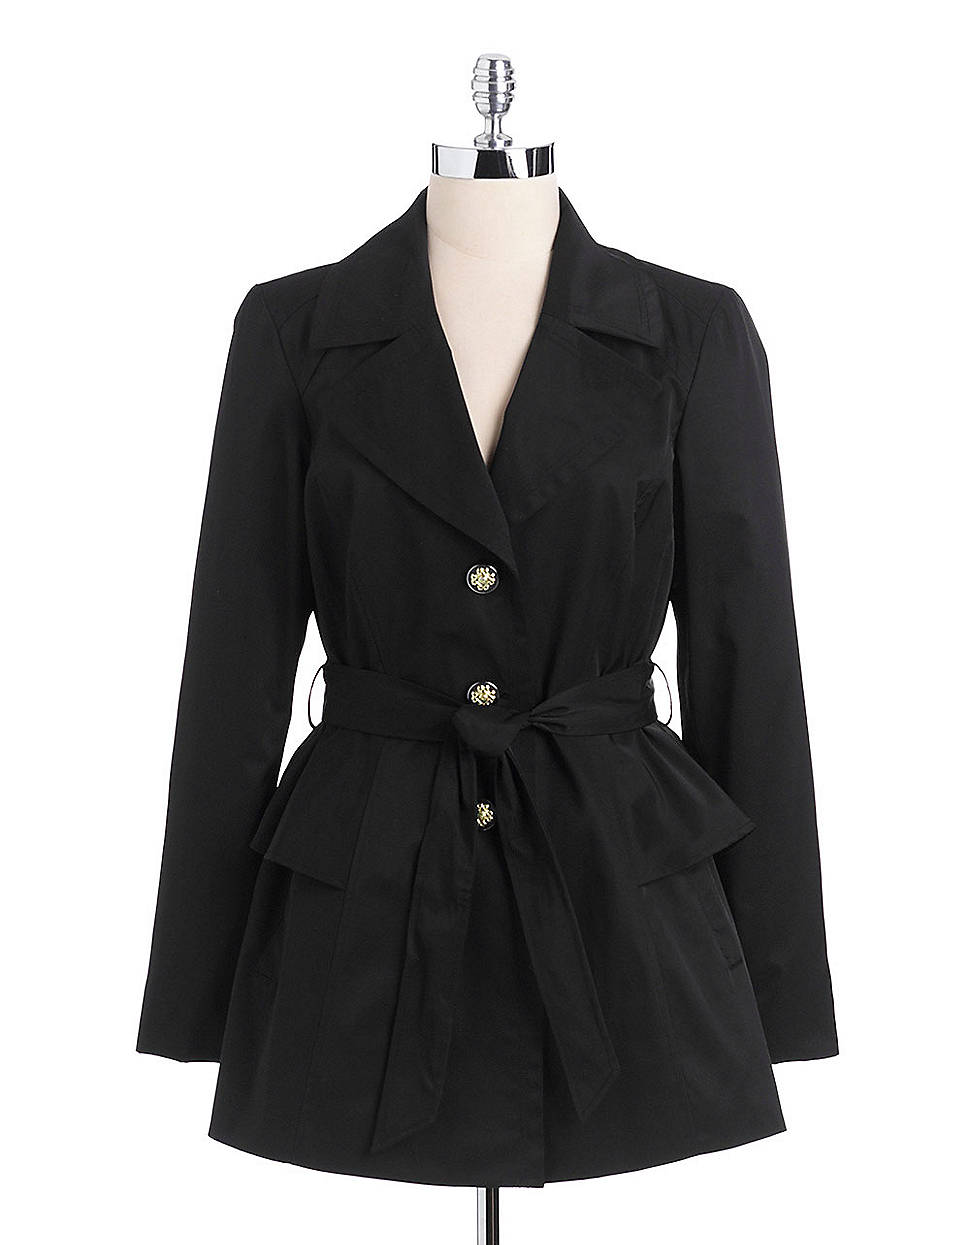 Lyst - Jessica Simpson Belted Peplum Trench Coat in Black